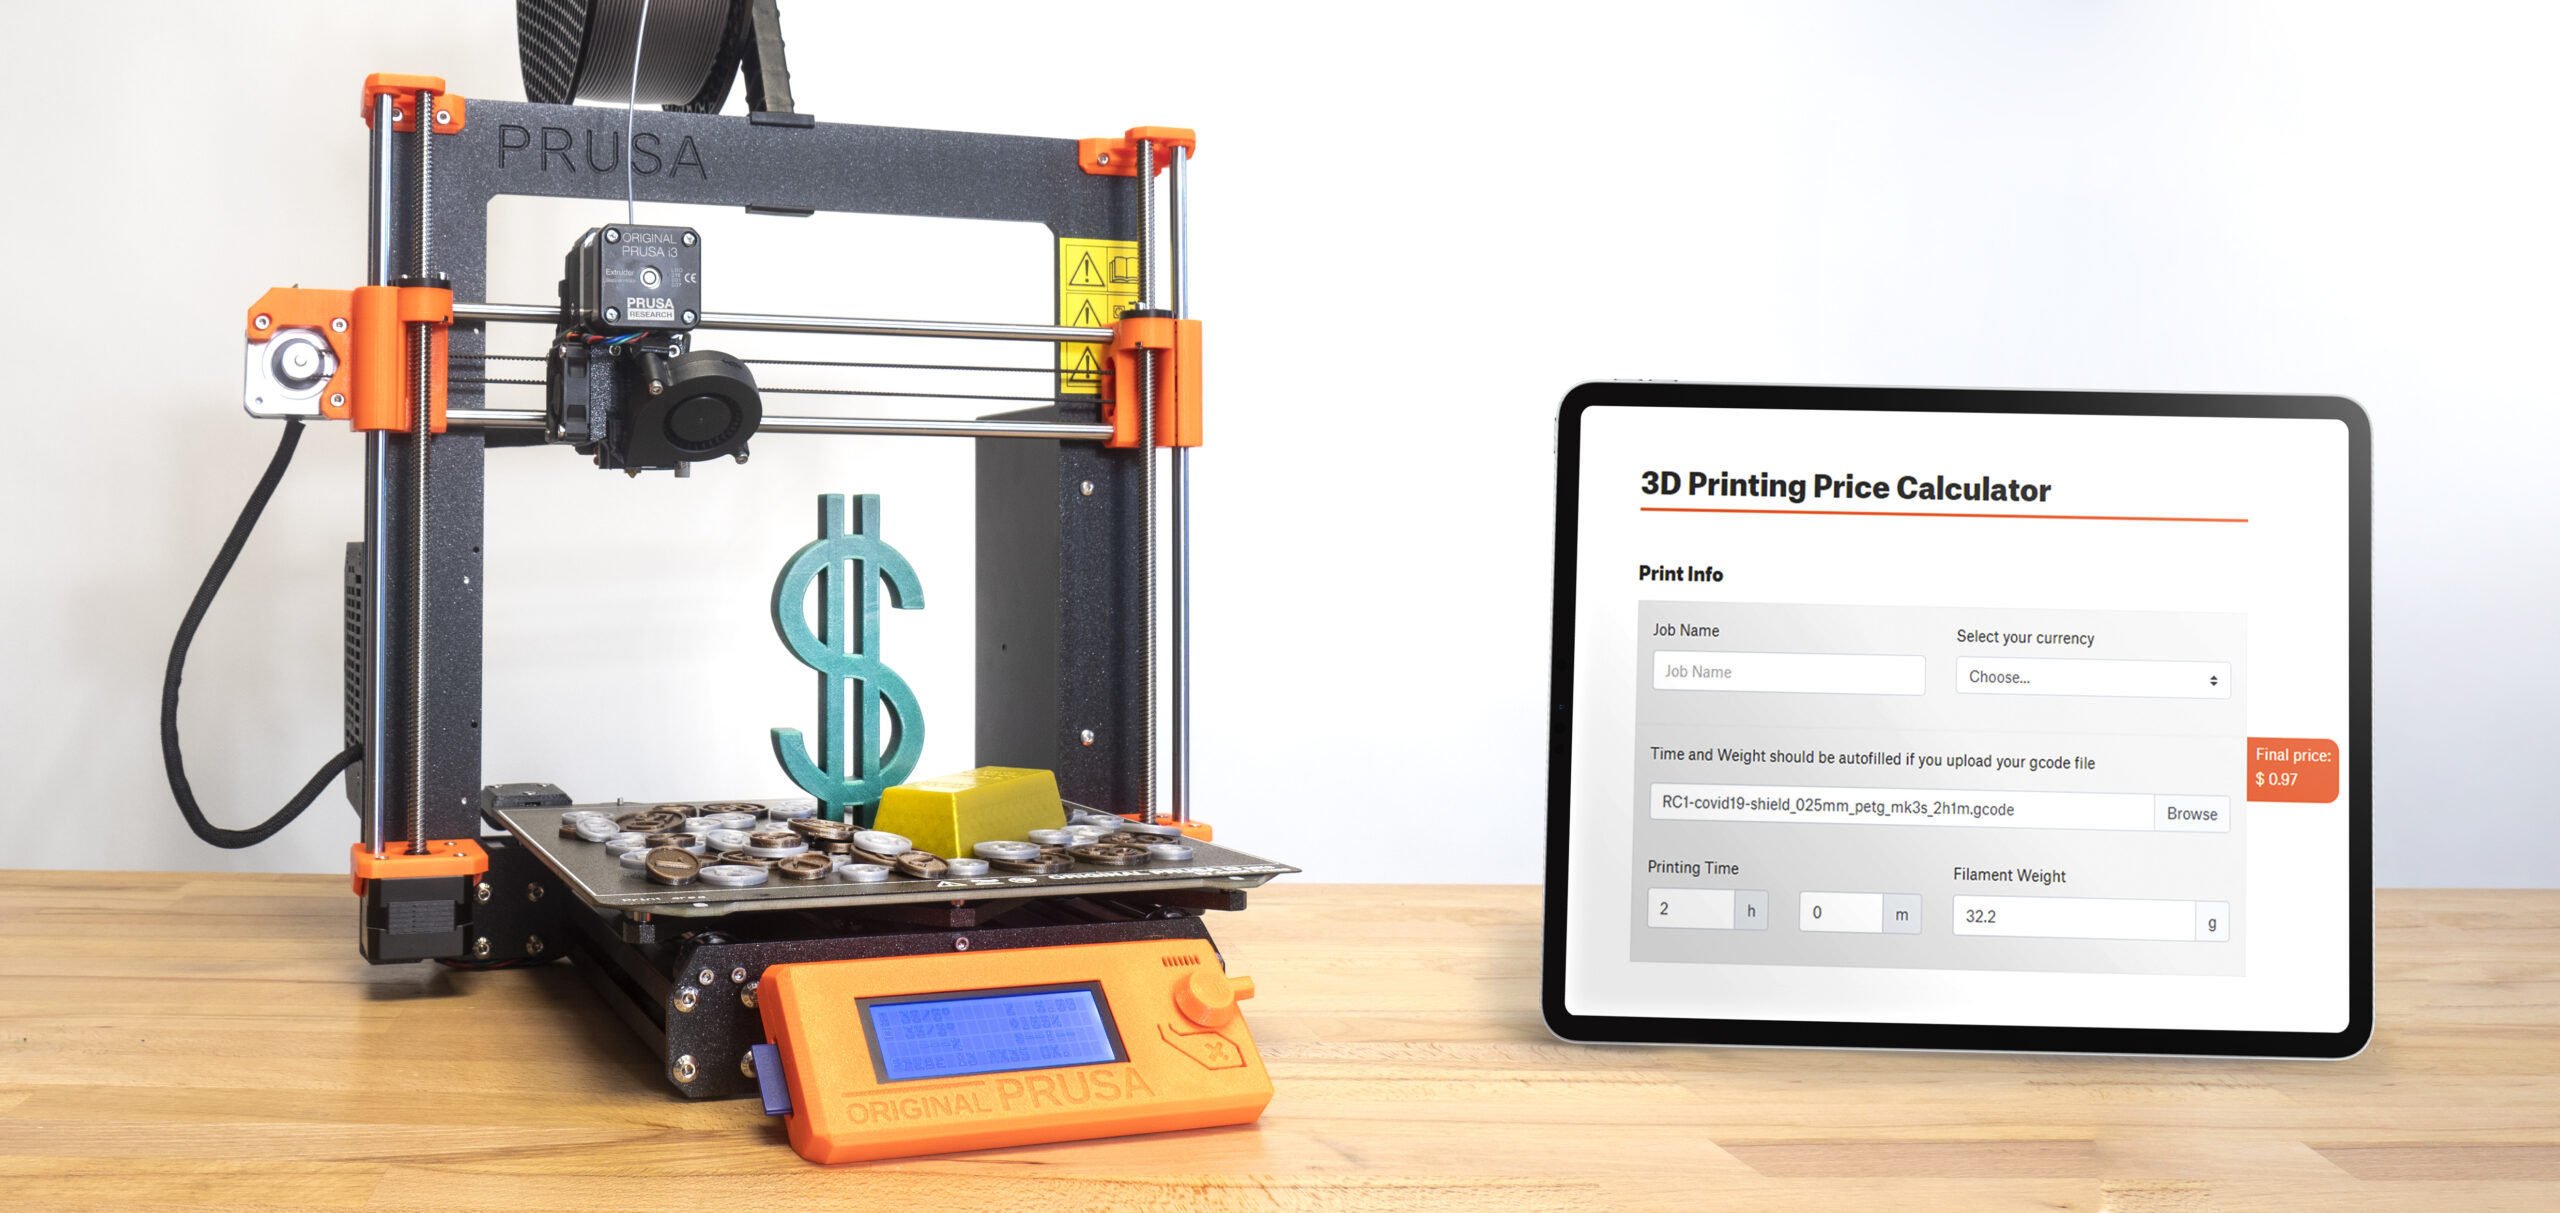 hydrogen Caius civilisere How to calculate 3D printing costs? - Original Prusa 3D Printers